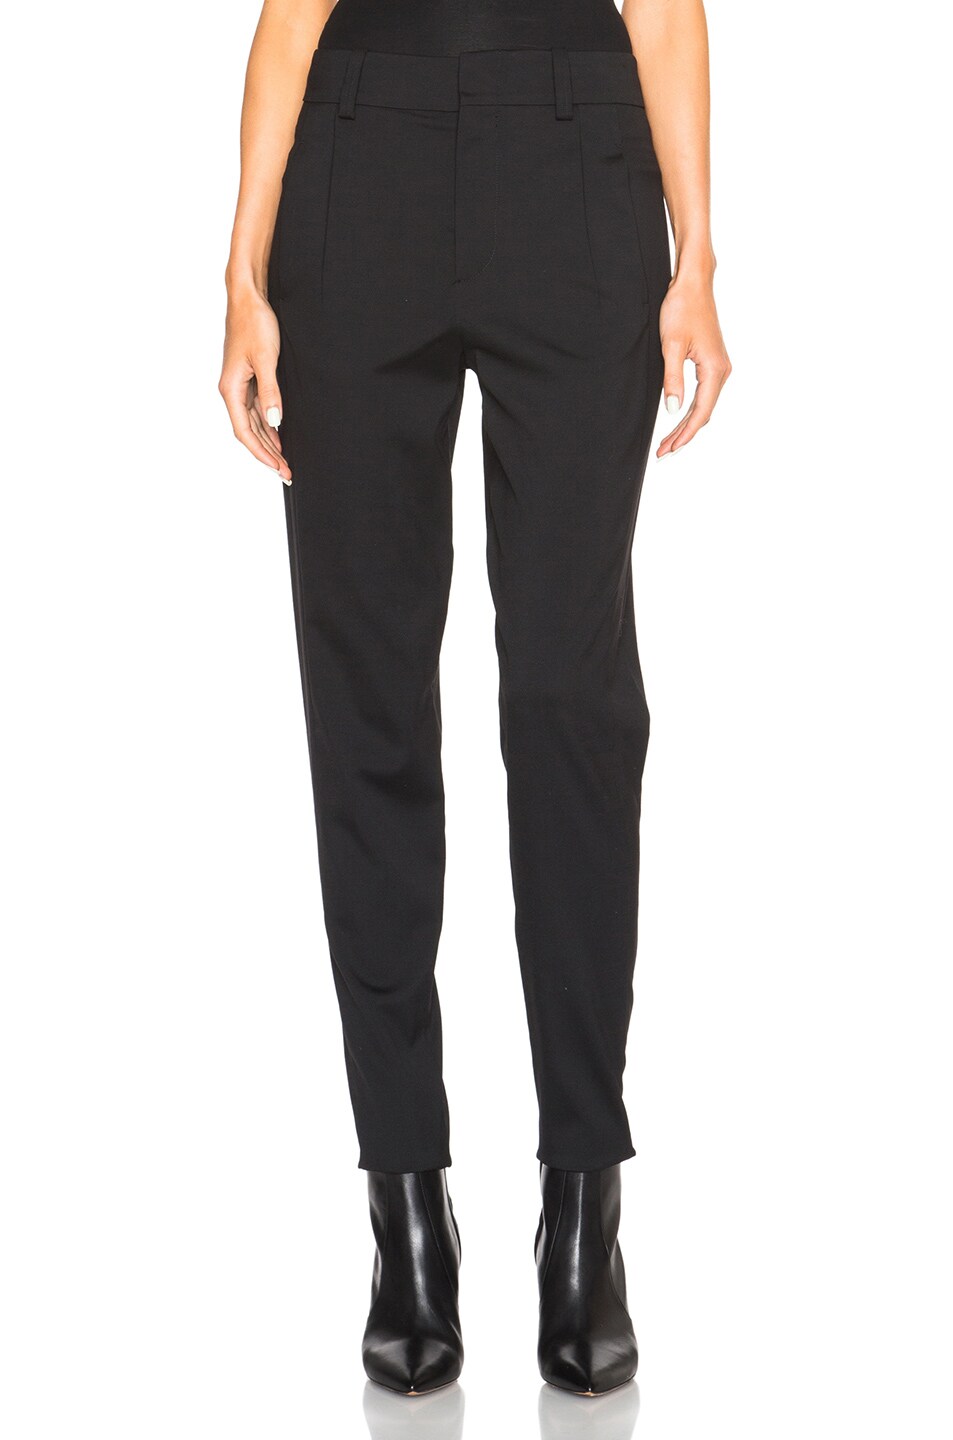 Image 1 of Anthony Vaccarello Men's Pants in Black